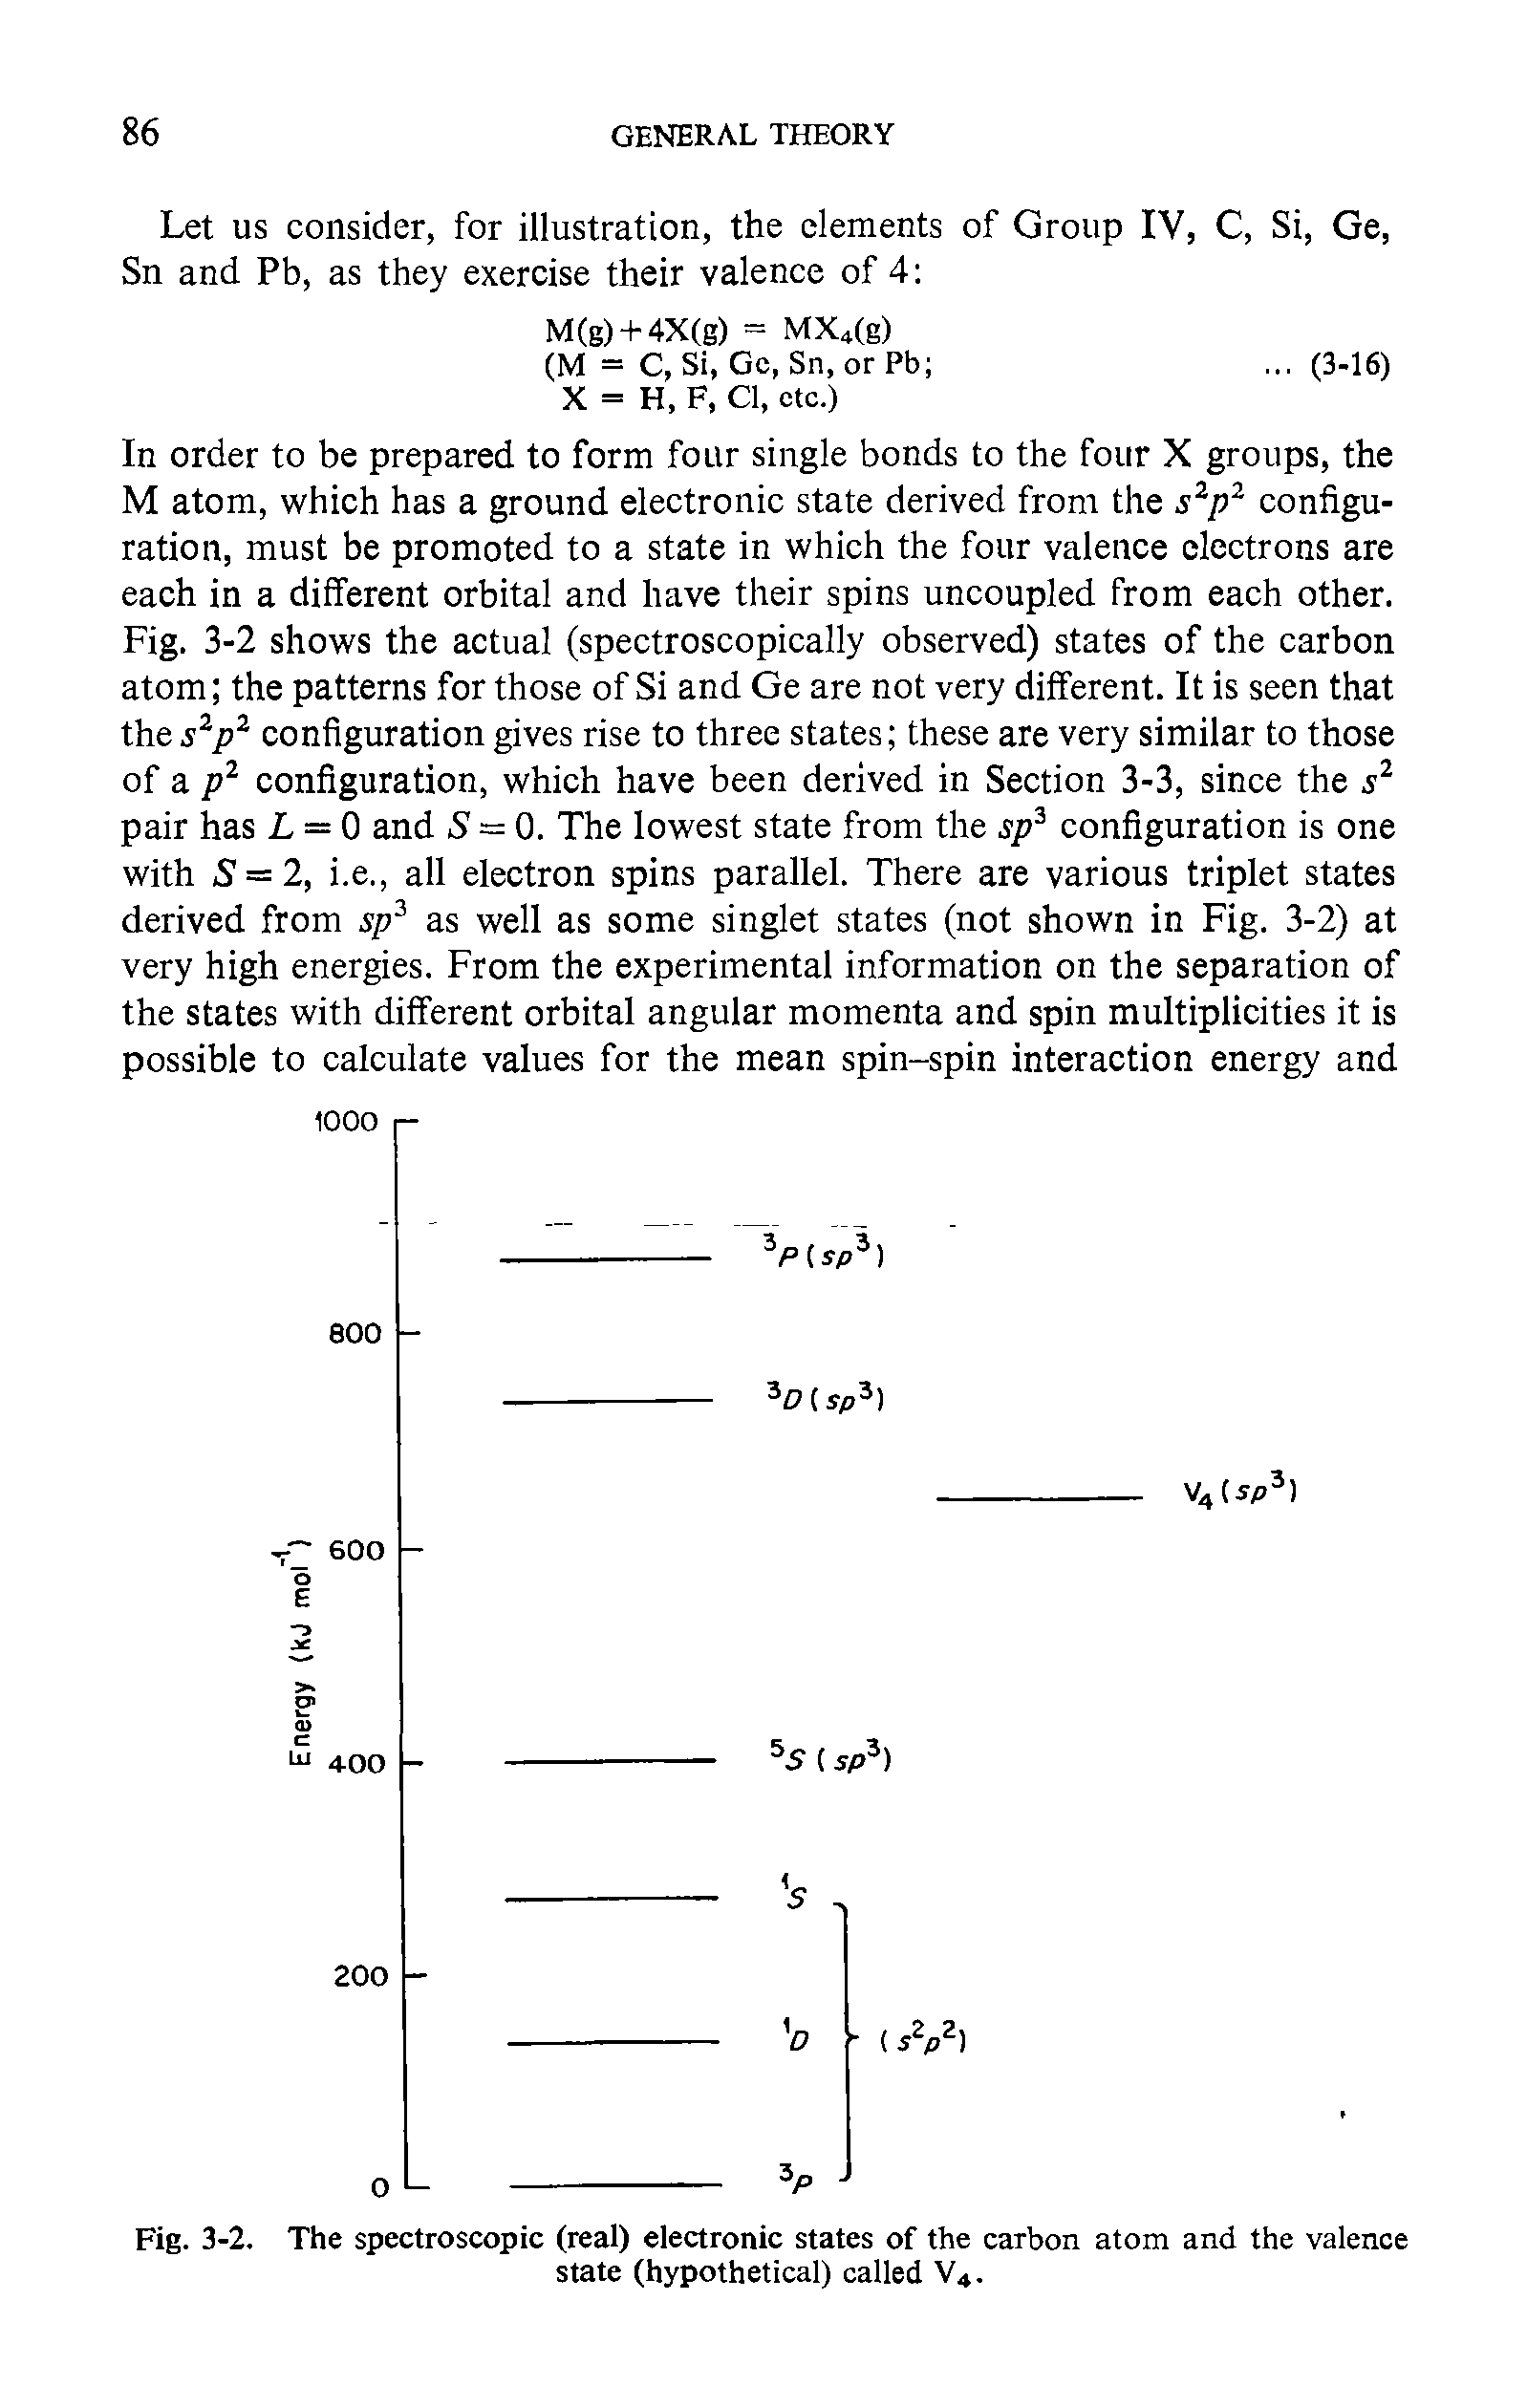 Fig. 3-2. The spectroscopic (real) electronic states of the carbon atom and the valence state (hypothetical) called V4.